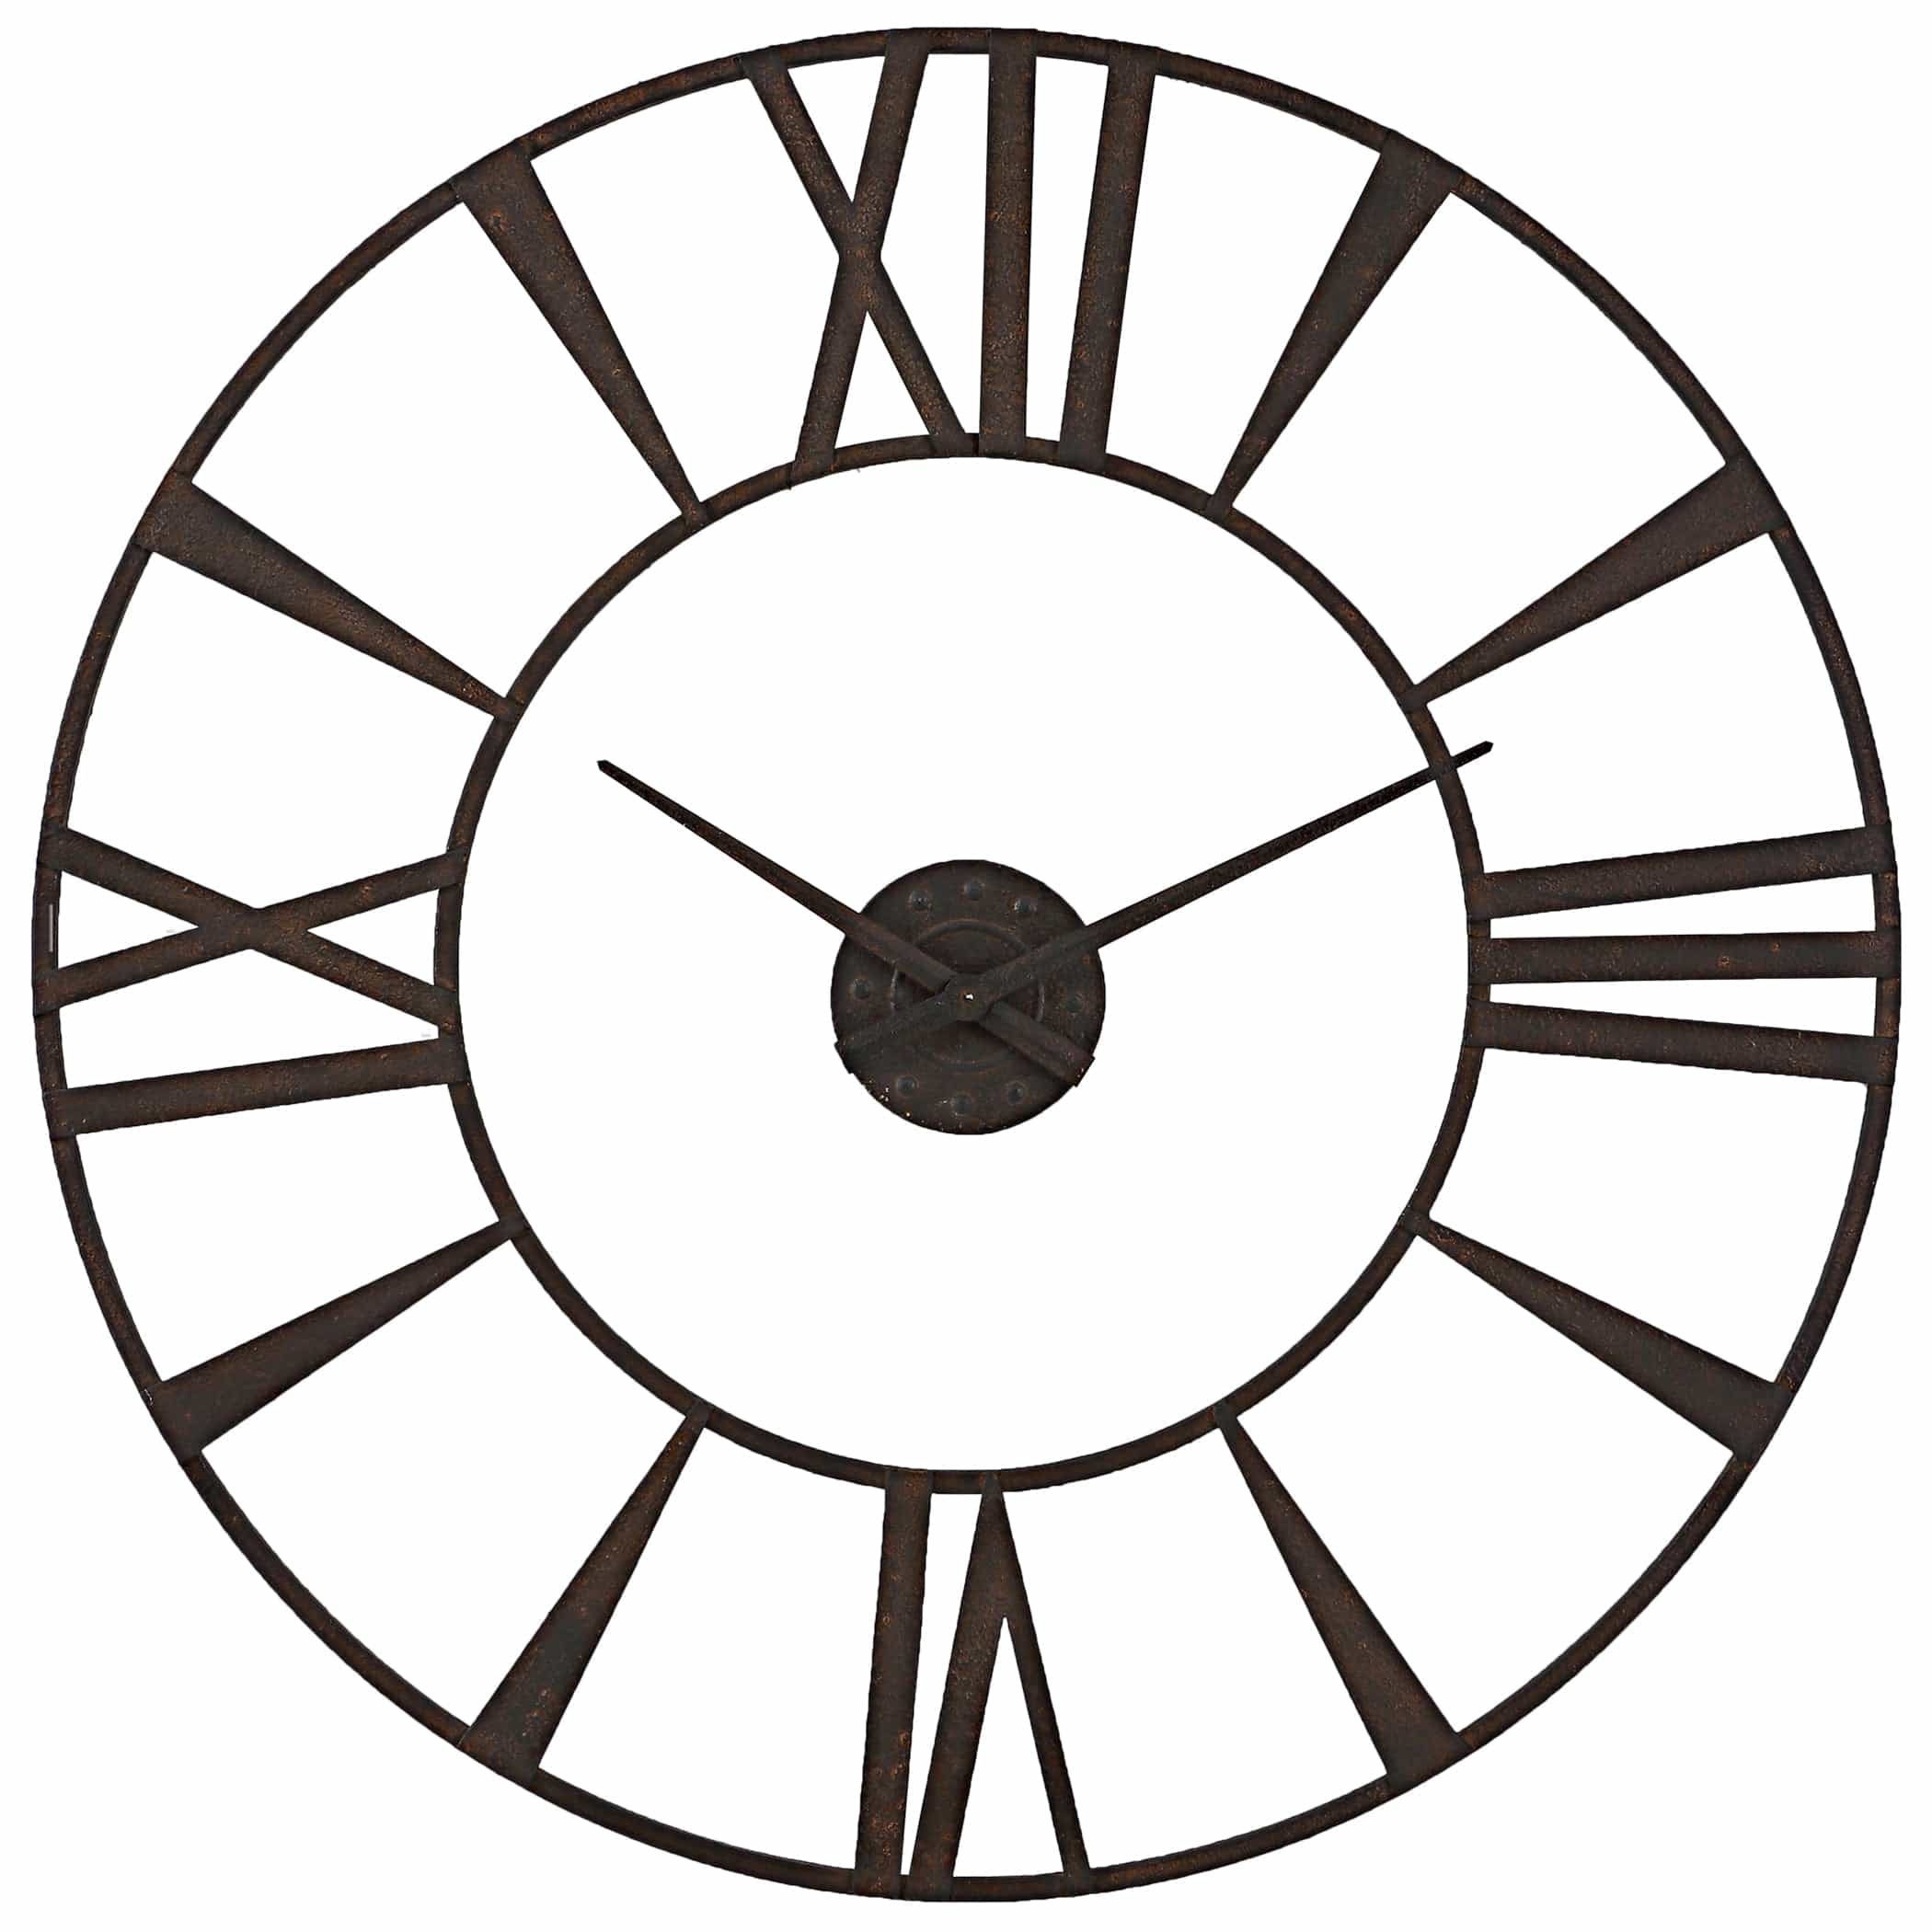 Storehouse Rustic Wall Clock Uttermost